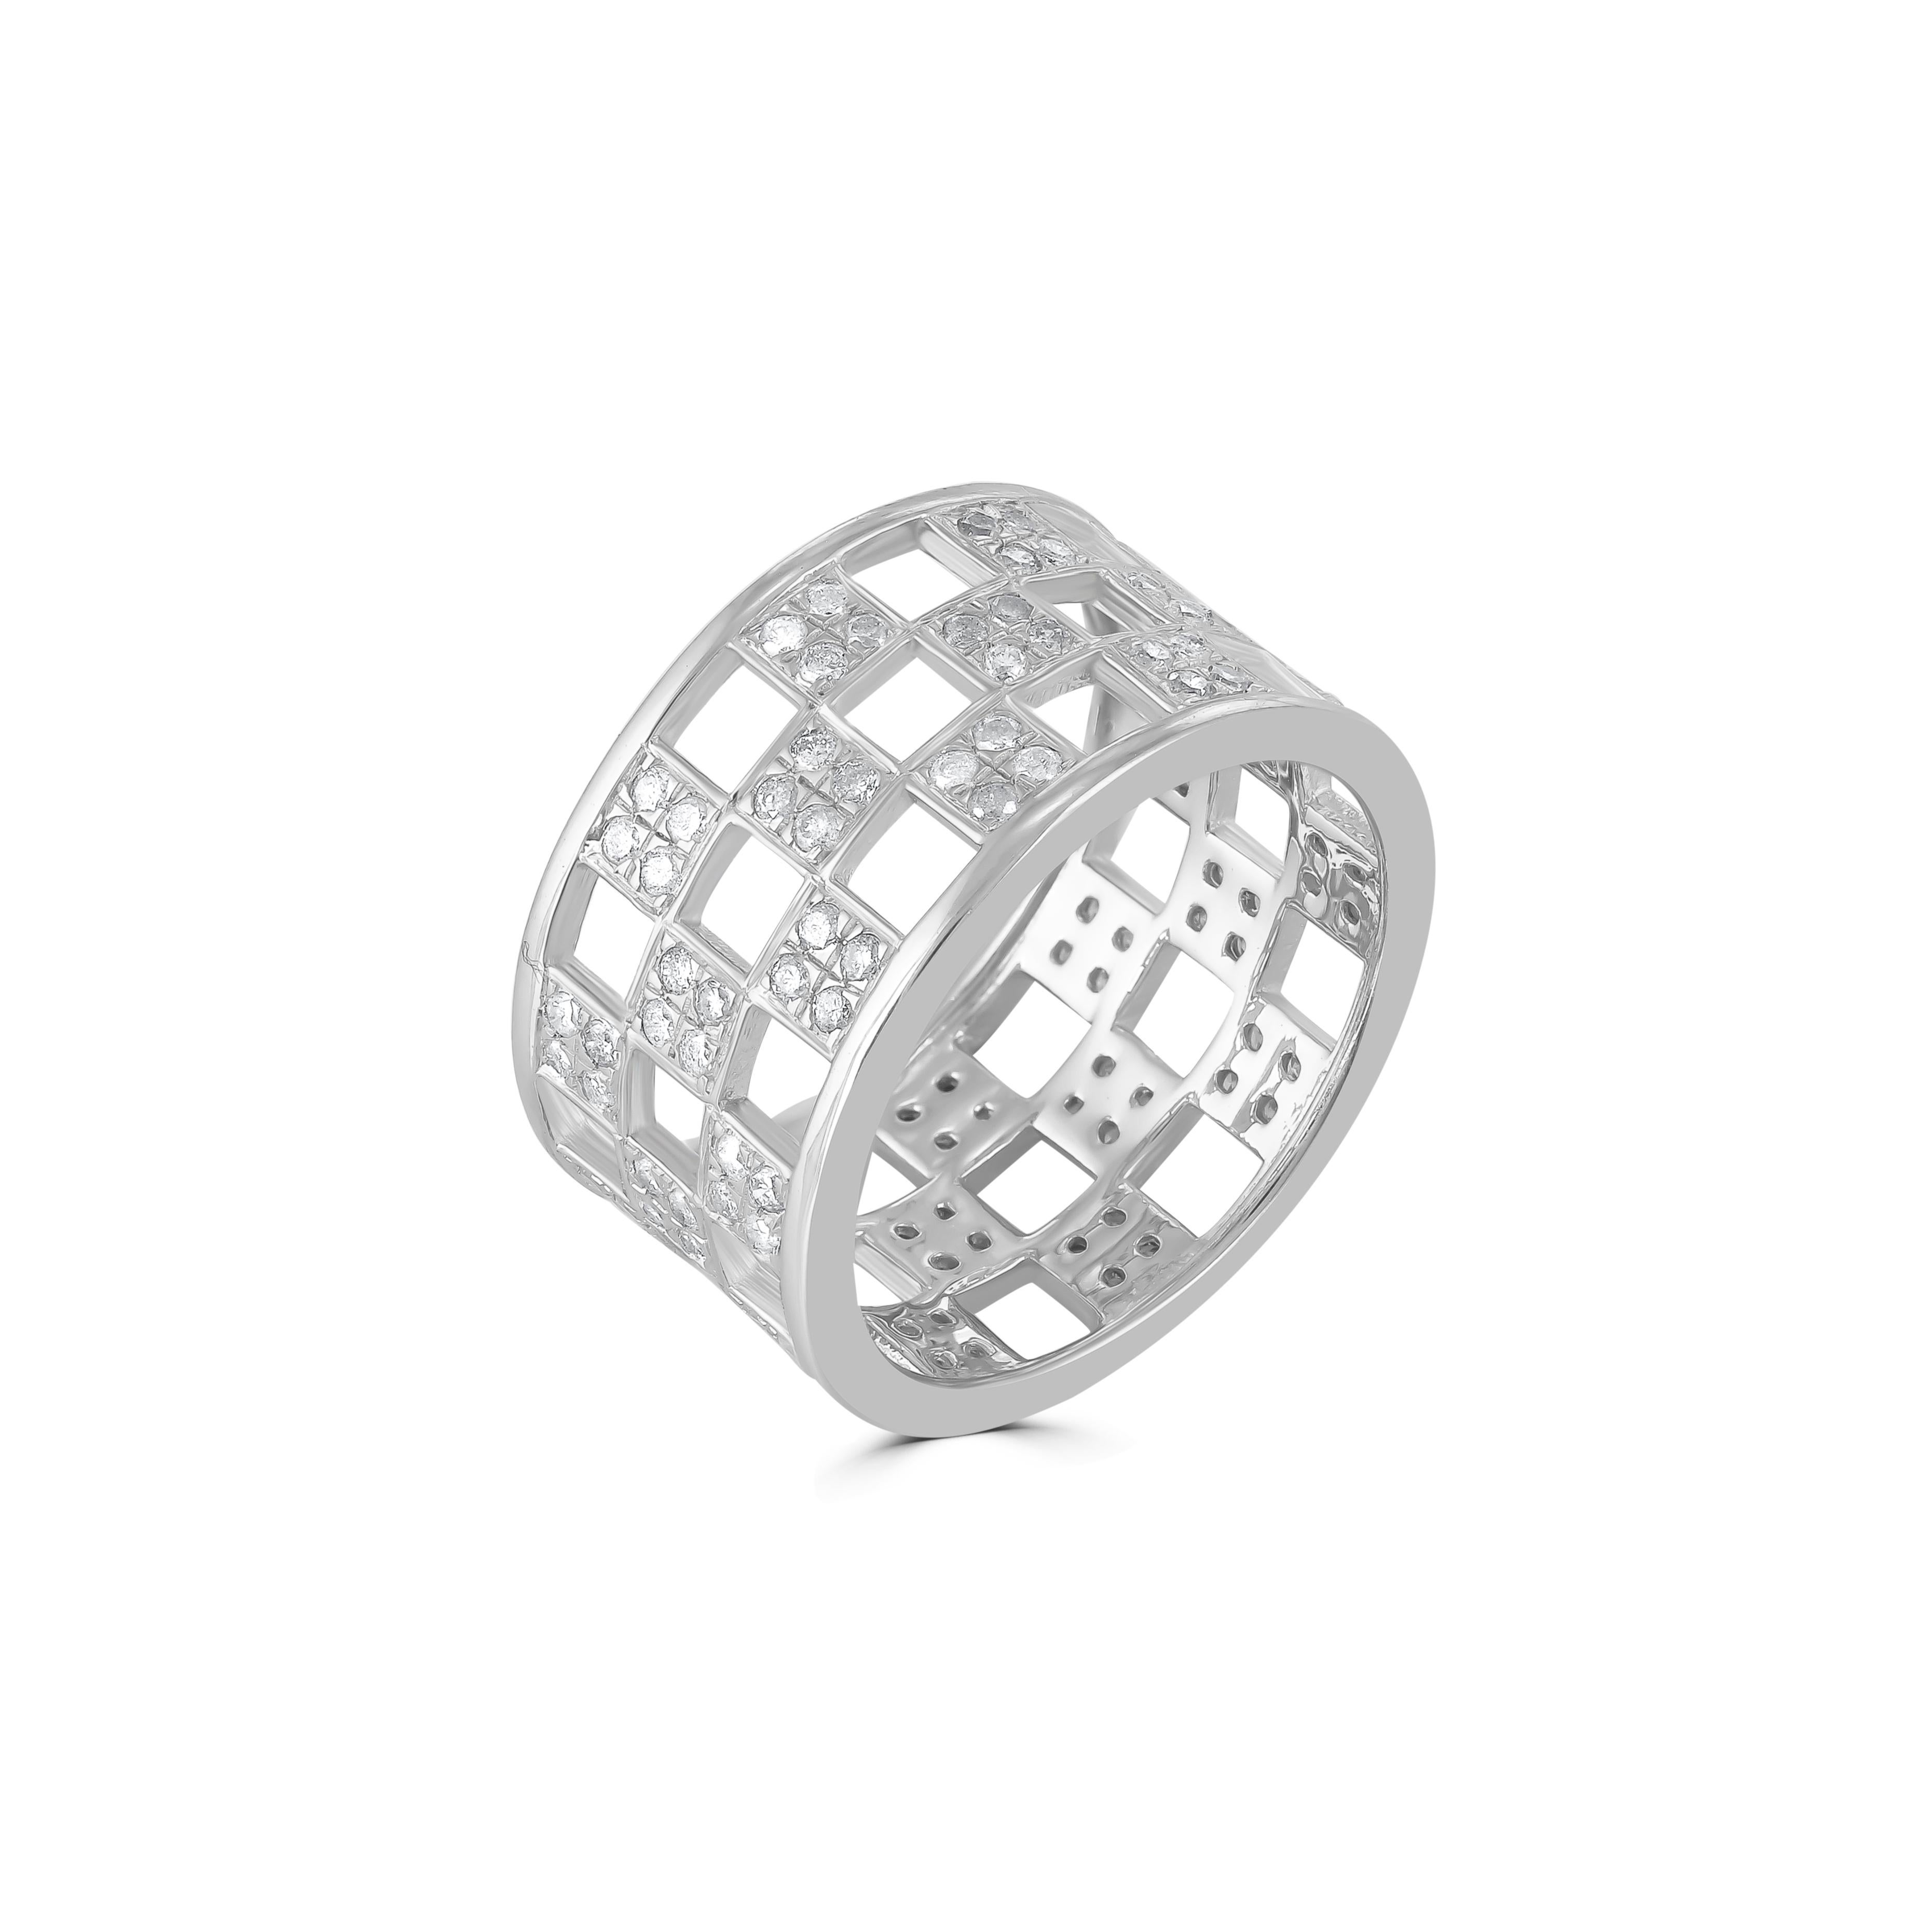 A creative mix of free form lattice designs by Gemistry, features alternating open and diamond studded squares weaving an artful and mesmerizing pattern across the silver band . The 1.07 ct. t.w. round and pave diamonds enclosed in 925 polished